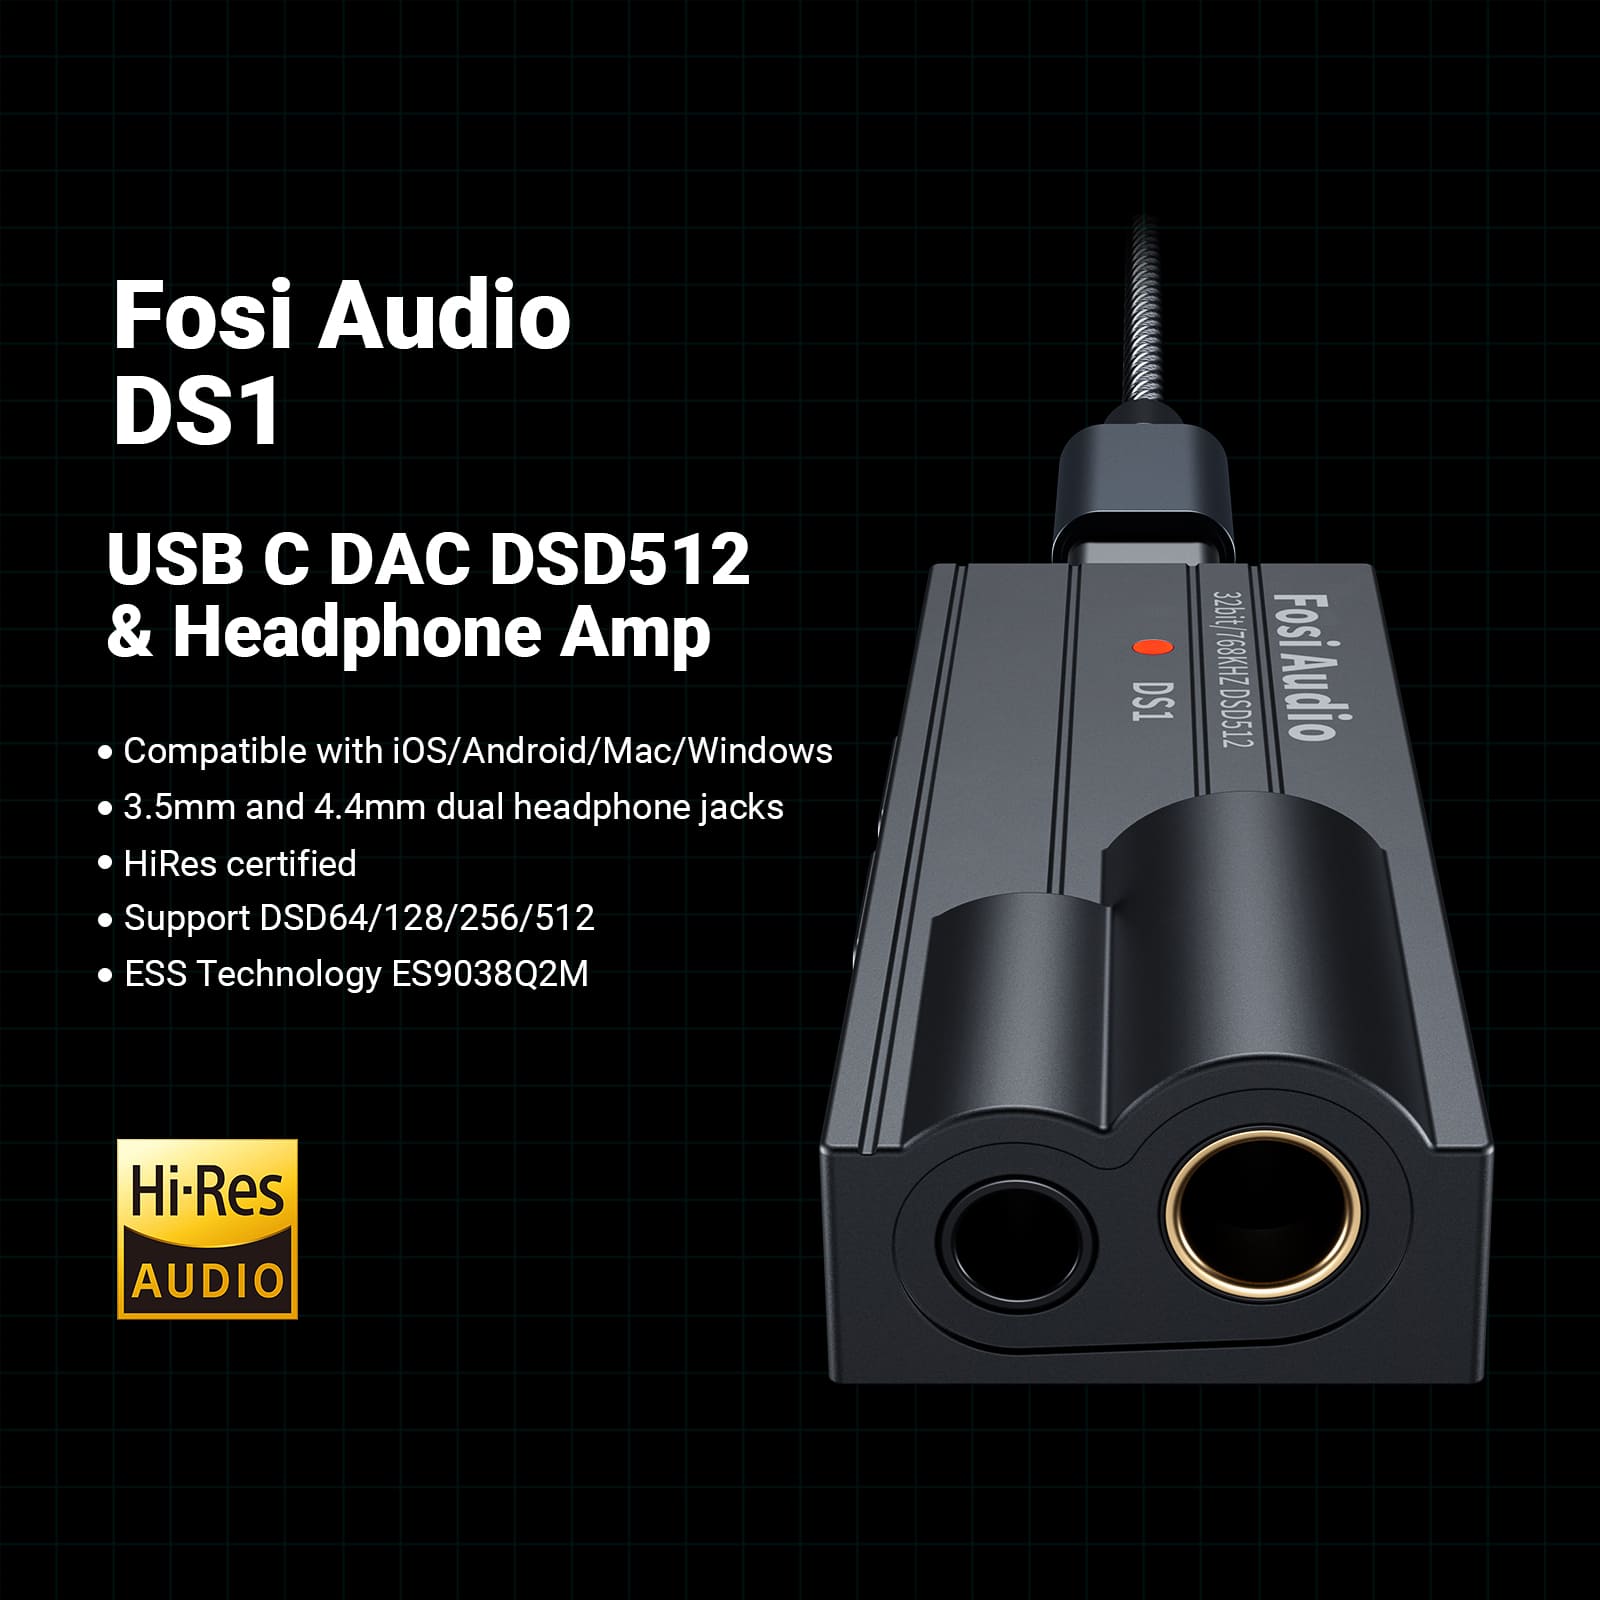 Fosi Audio DS1 Headphone Amps Tiny Amplifier USB DAC High Resolution Supports 32bit/768kHz and DSD512 Headphone Outputs 3.5mm/4.4mm for Smartphones/Laptop/PC/Players